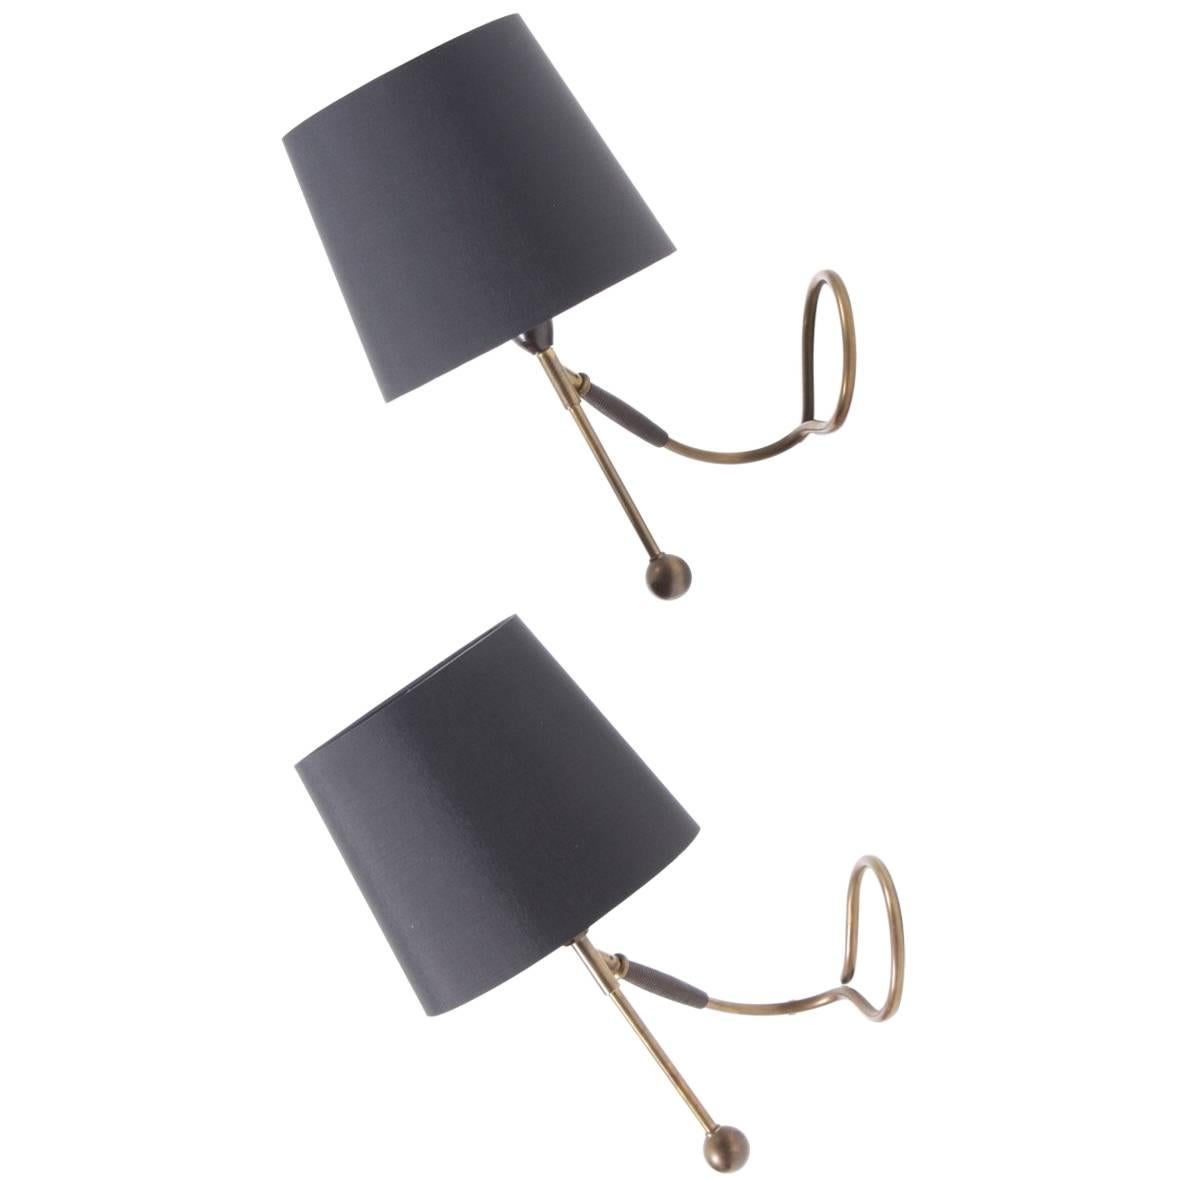 Pair of Table or Wall Lamps by Le Klint